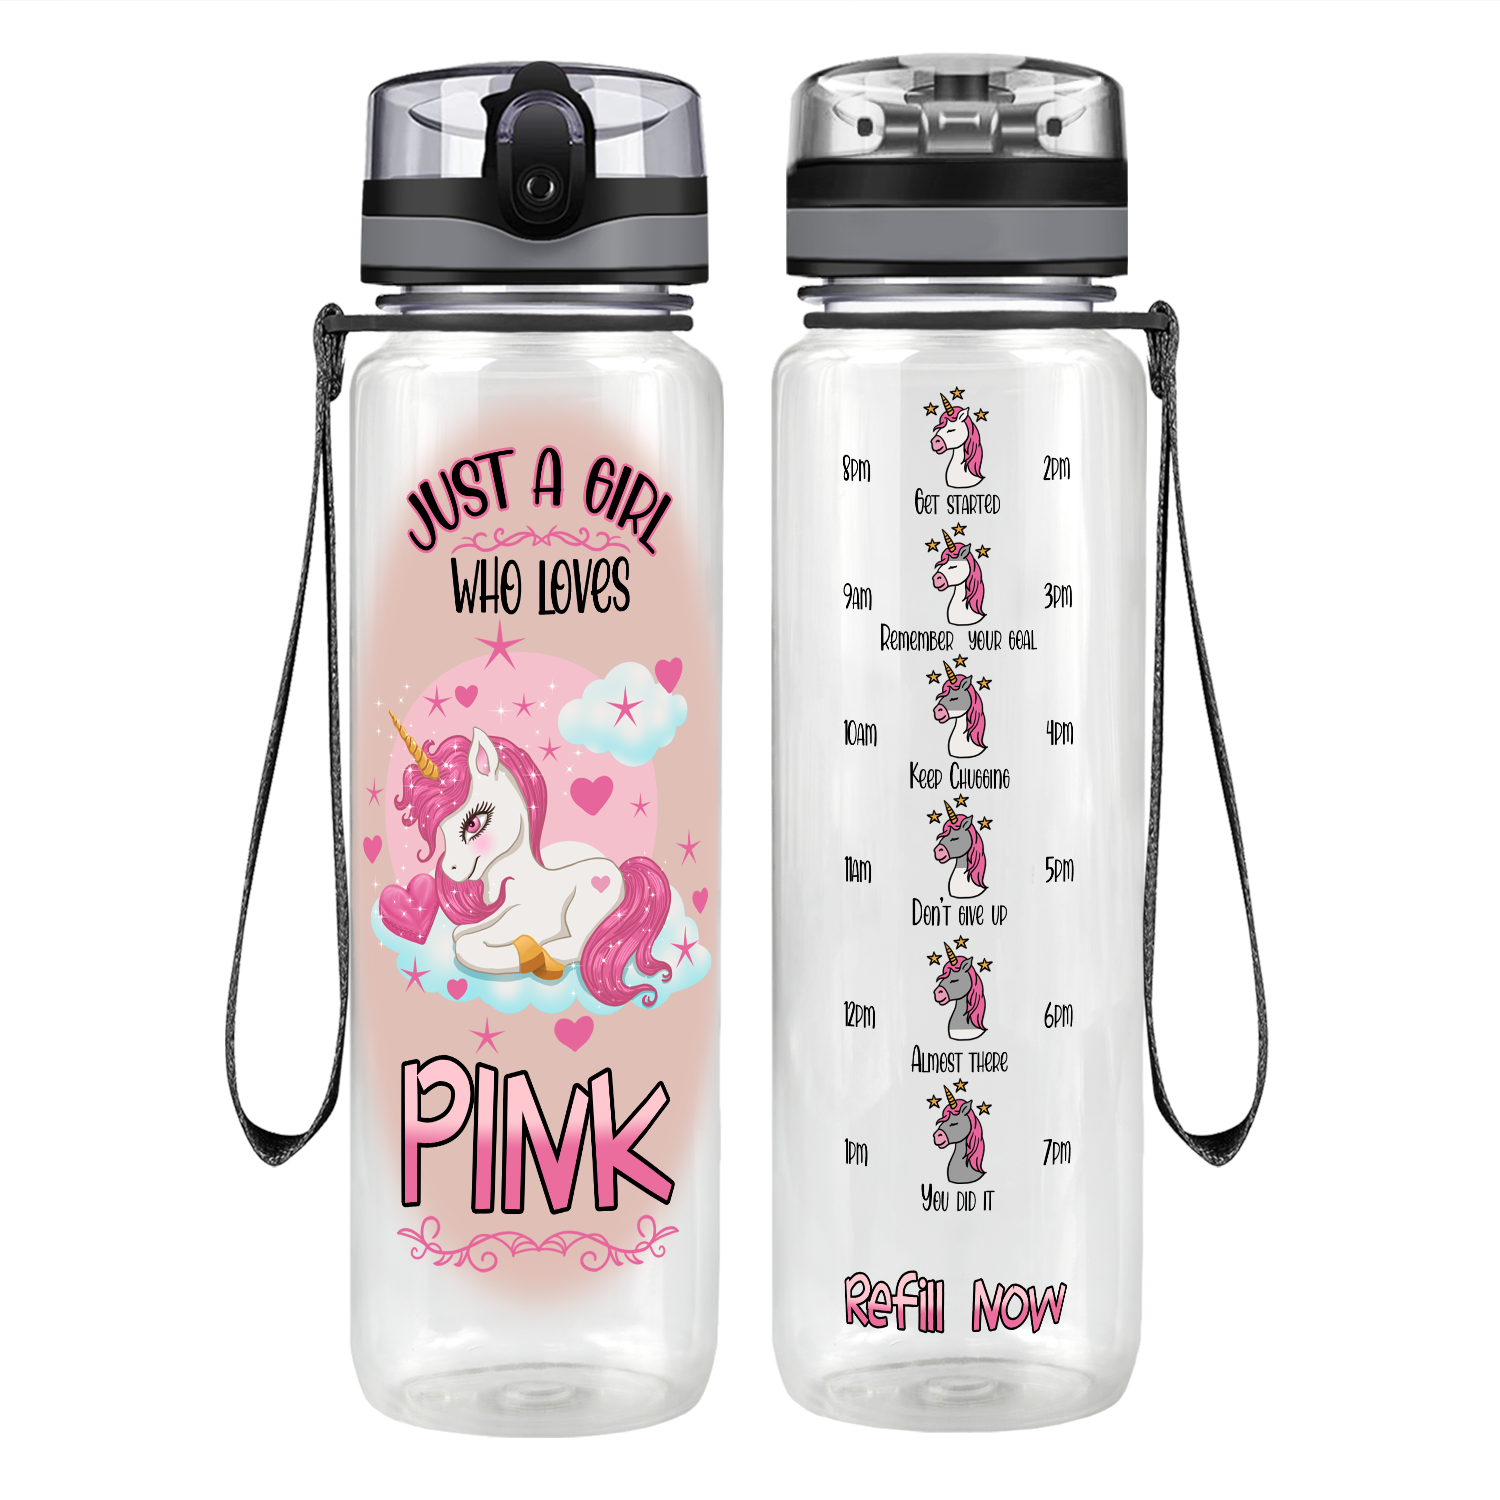 Just A Girl Who Loves Pink Motivational Tracking Water Bottle